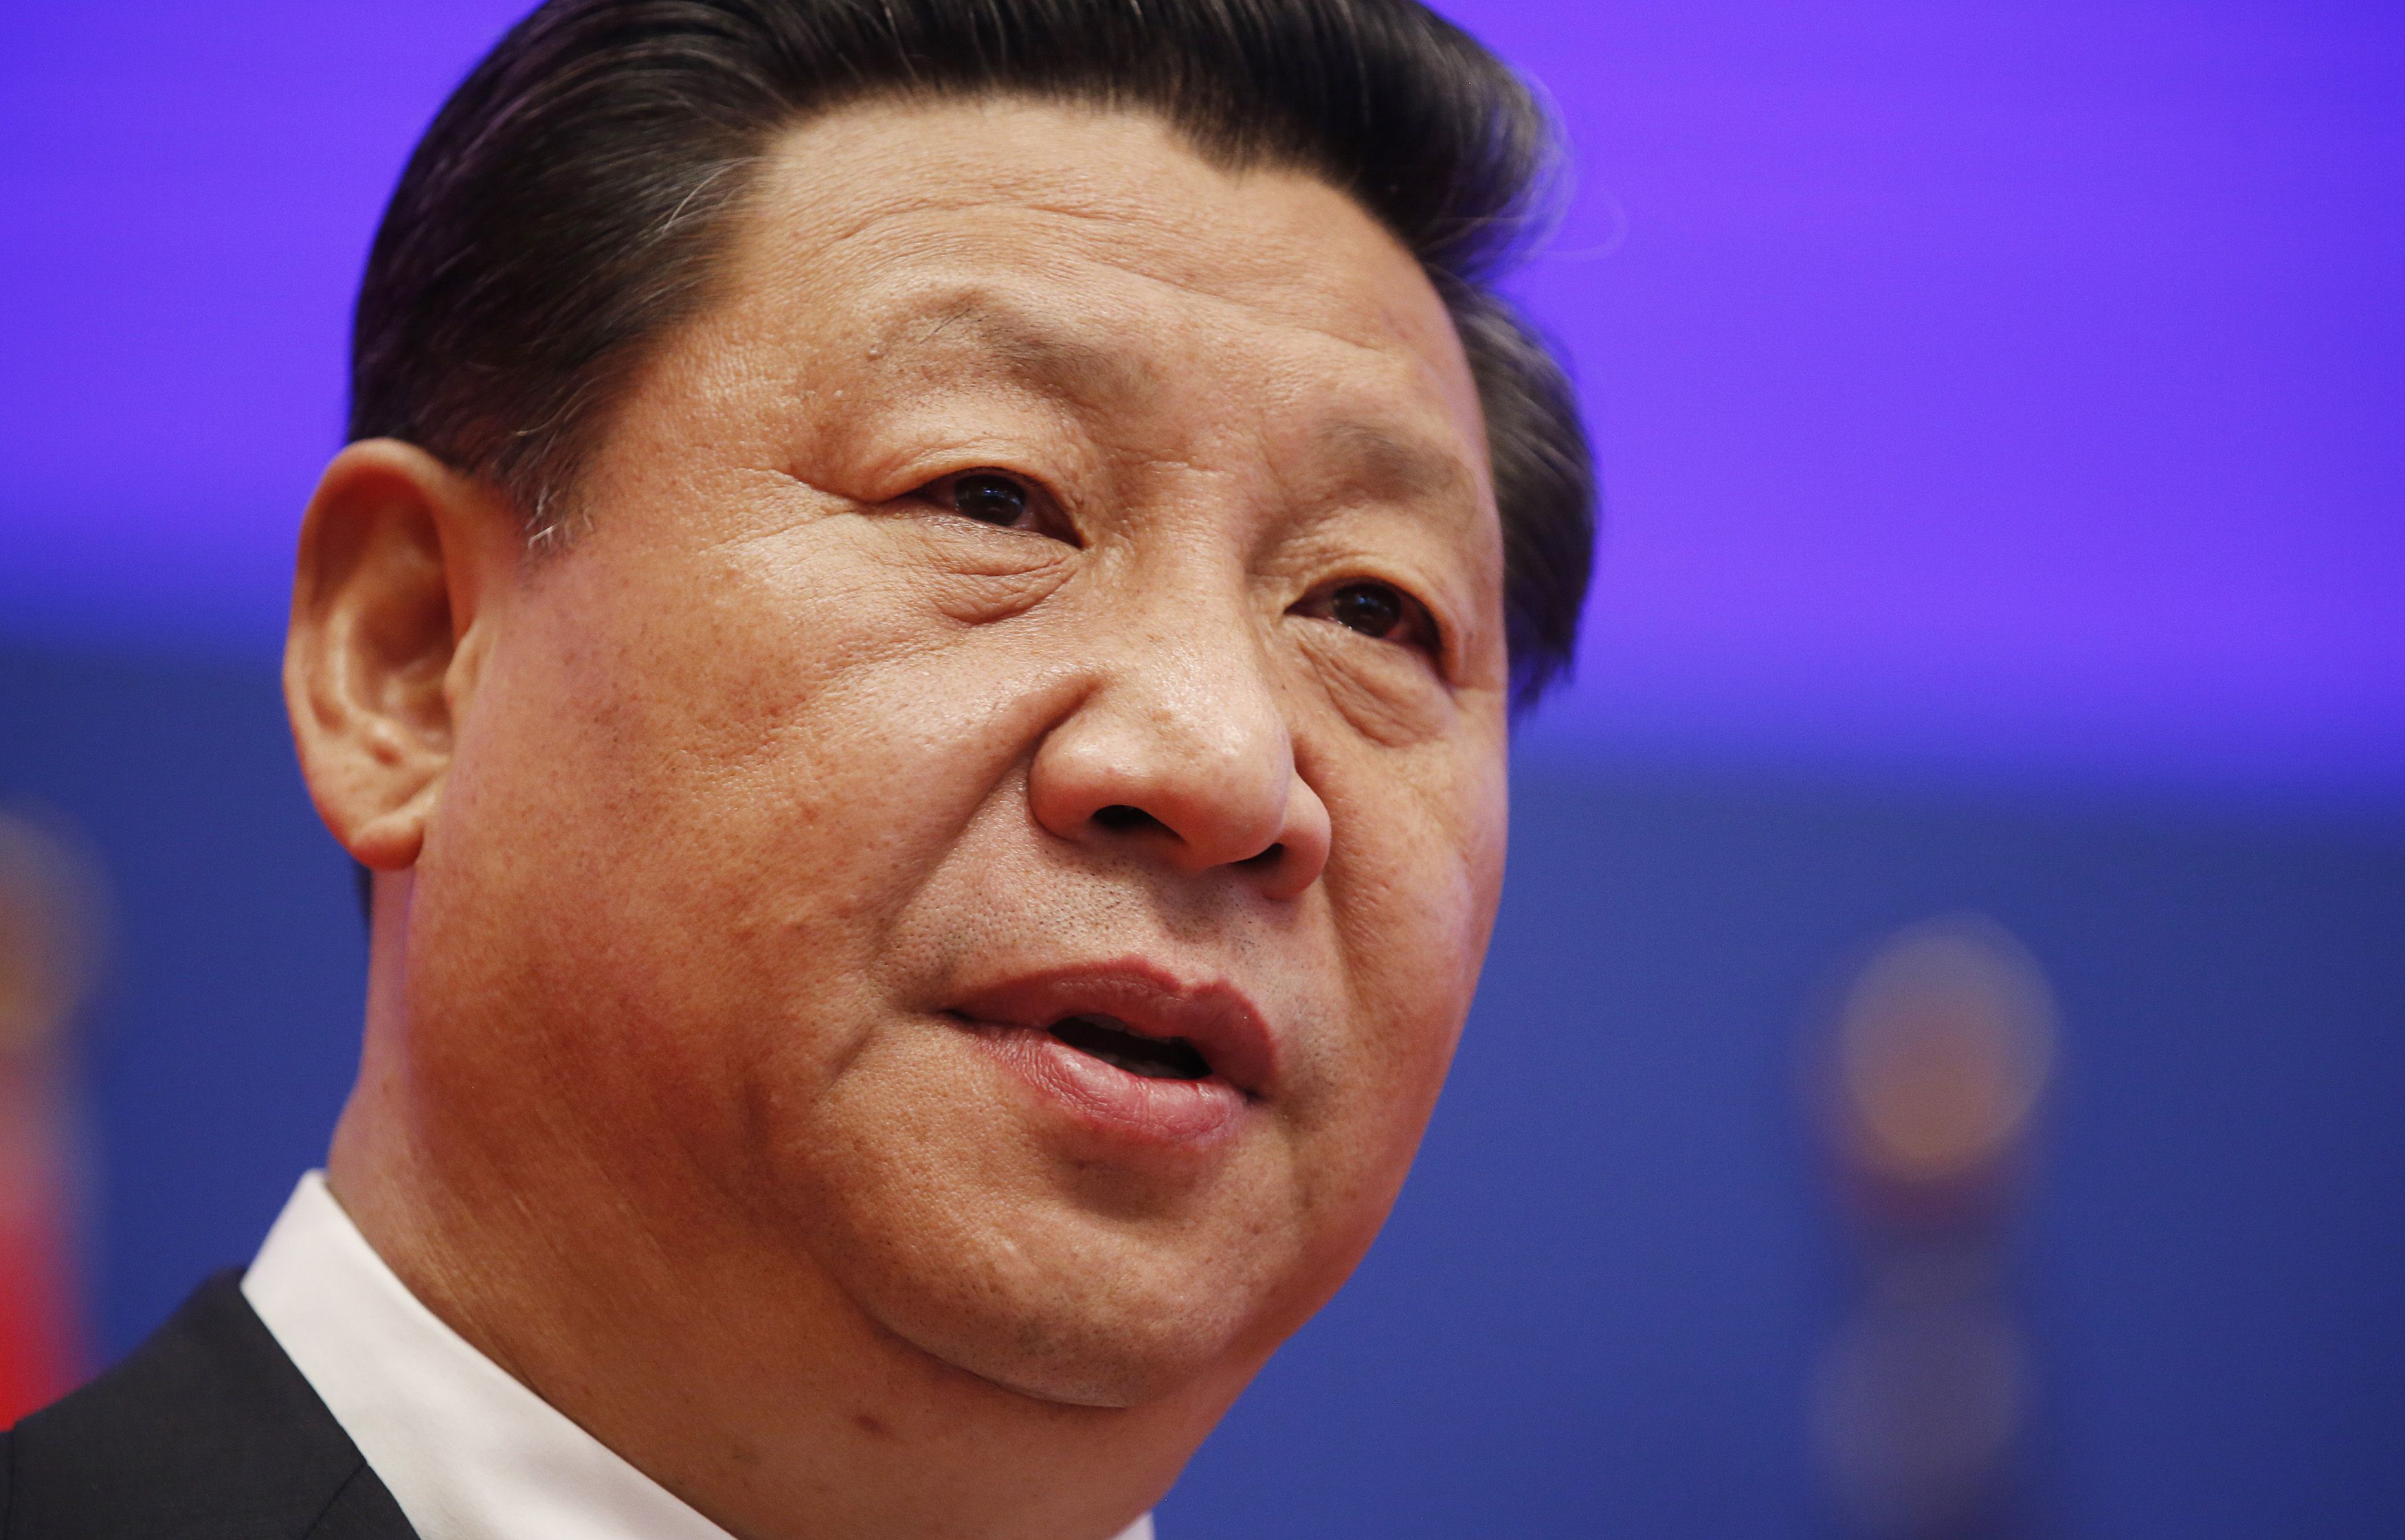 On the positive side, Xi has made it clear that stability must be maintained. Photo: AFP